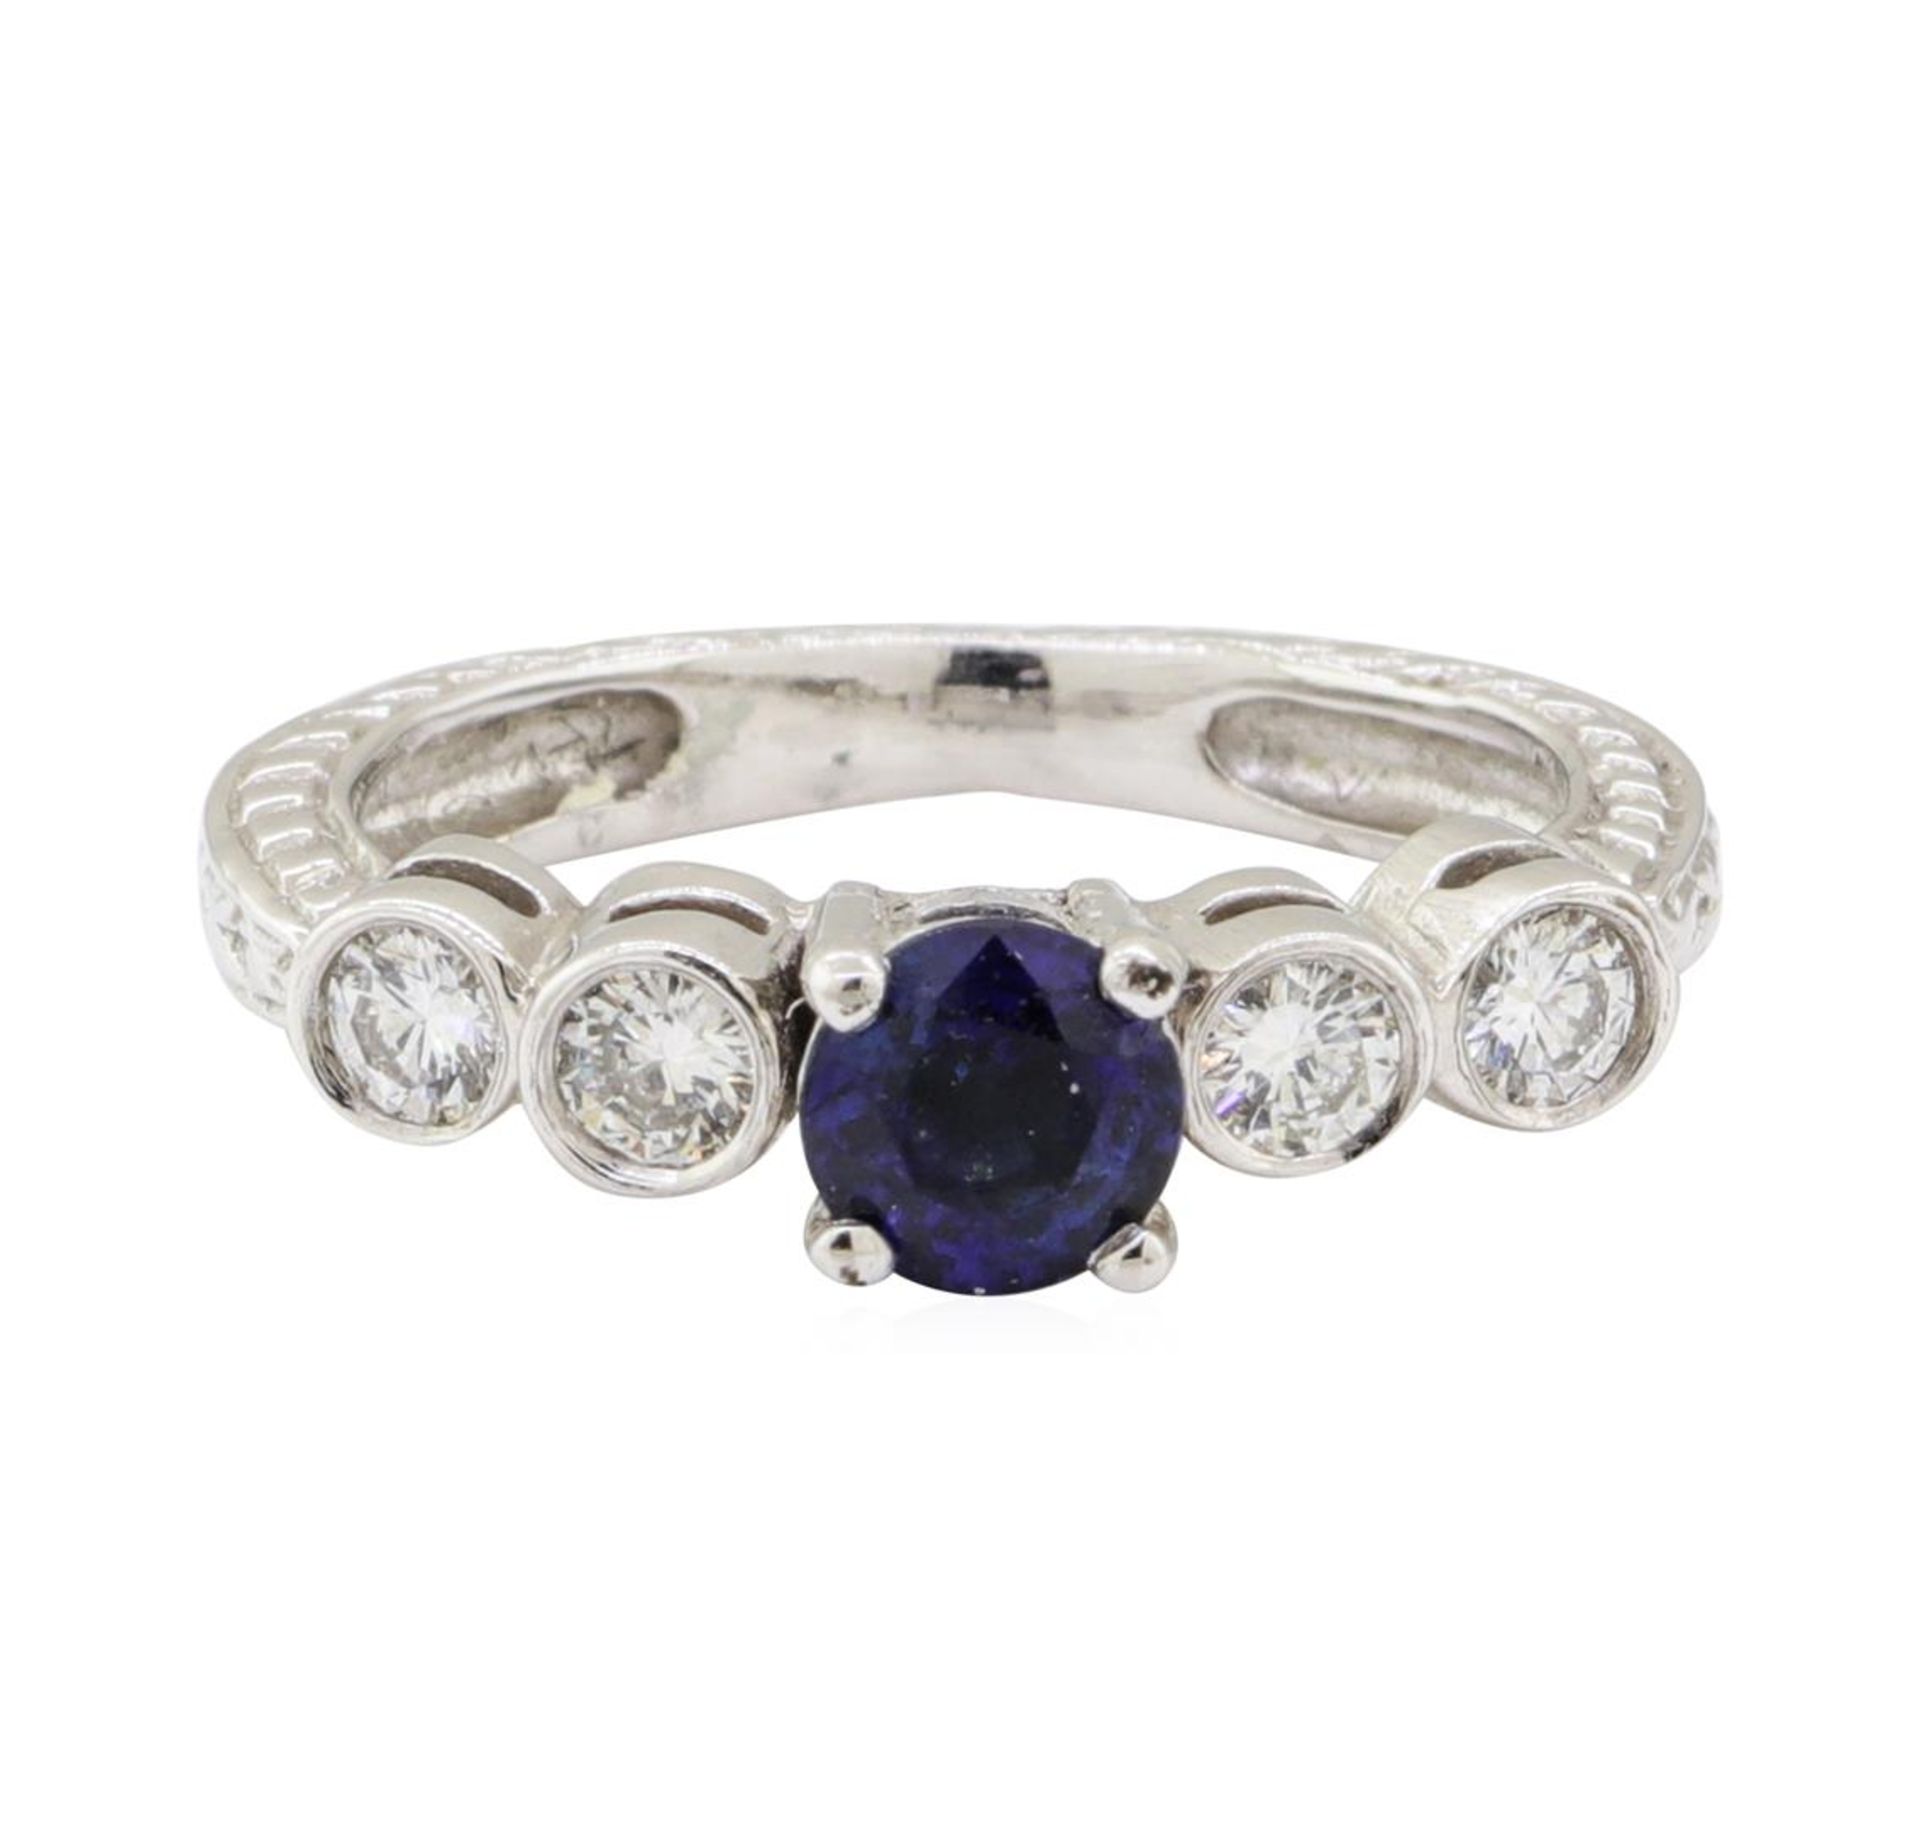 1.00 ctw Sapphire and Diamond Ring - 14KT White Gold - Image 2 of 3